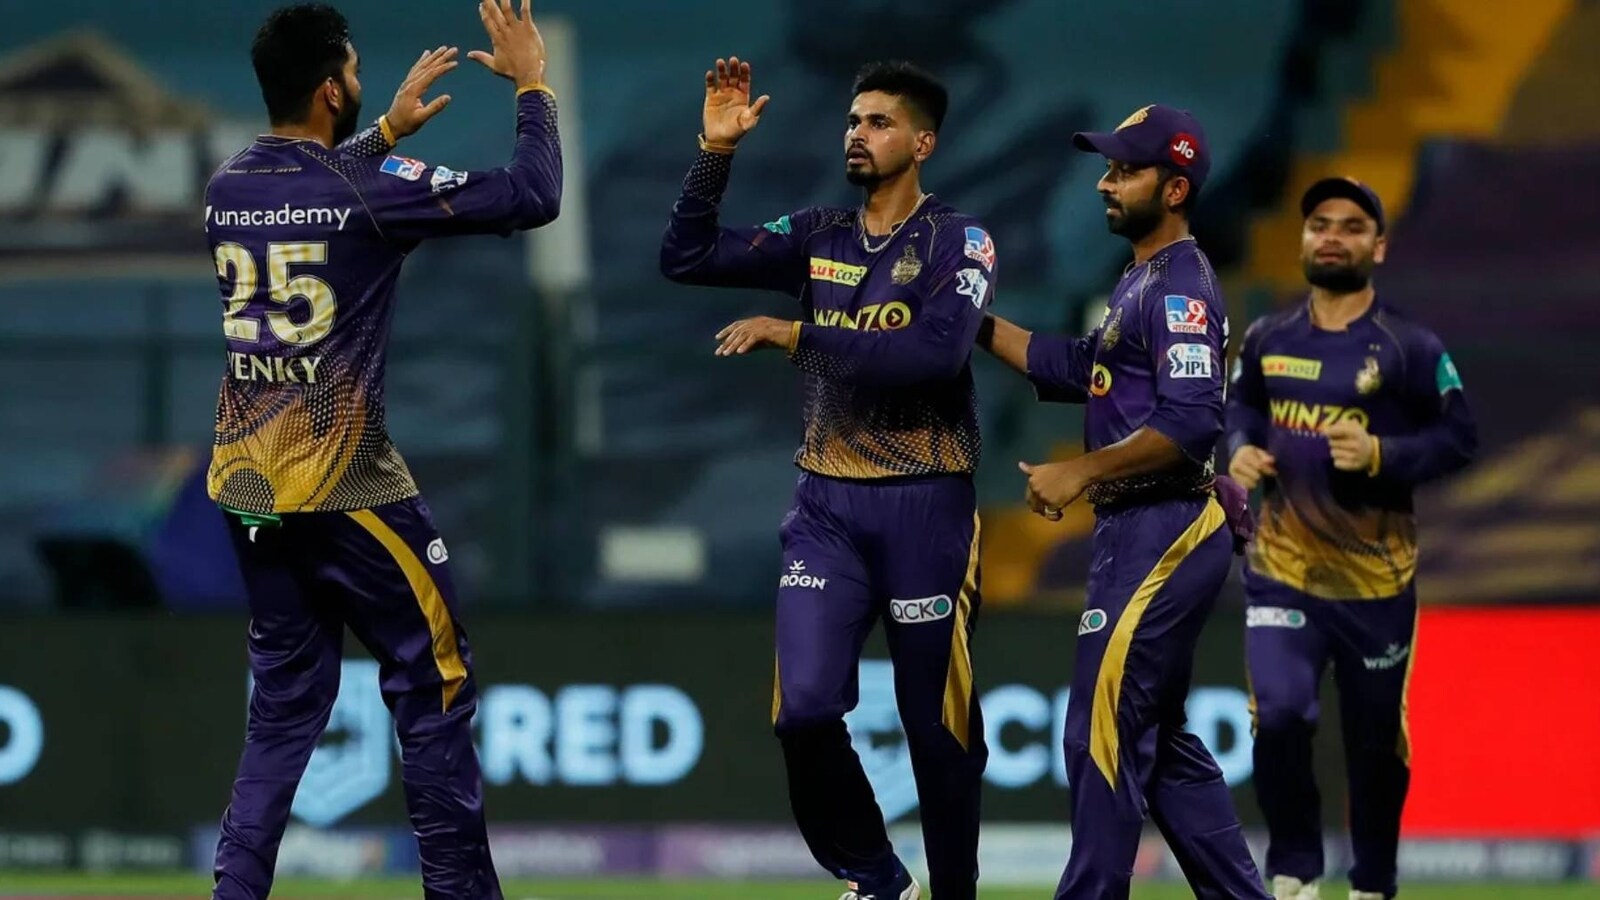 IPL 2022: Unsettled and unravelling, the Kolkata Knight Riders story